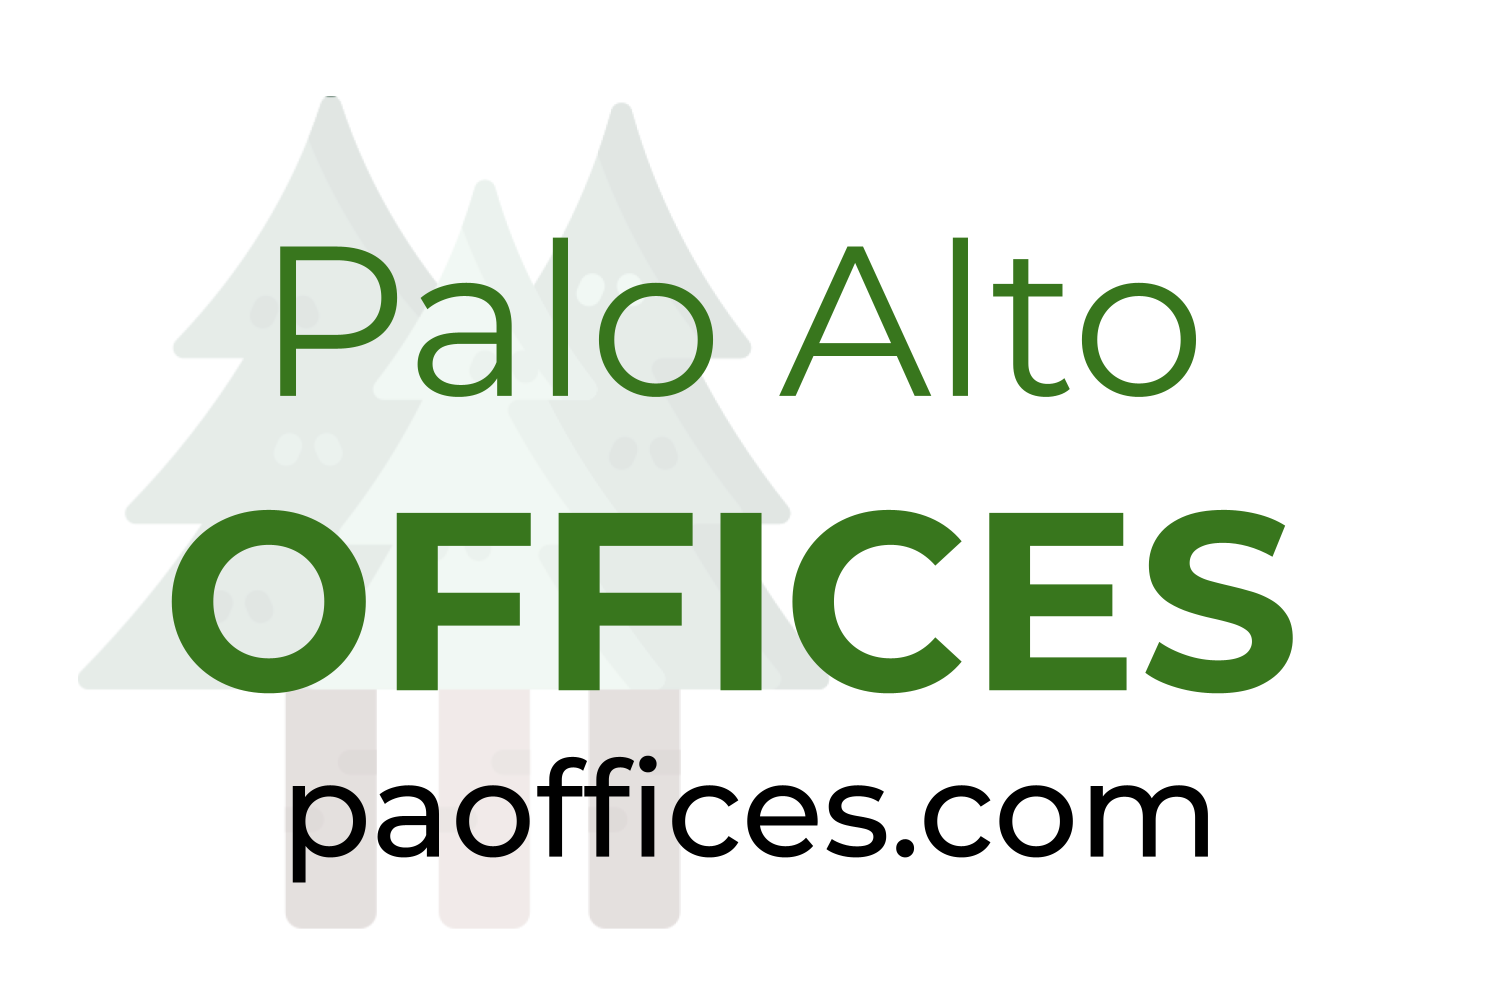 Palo Alto Offices logo with trees